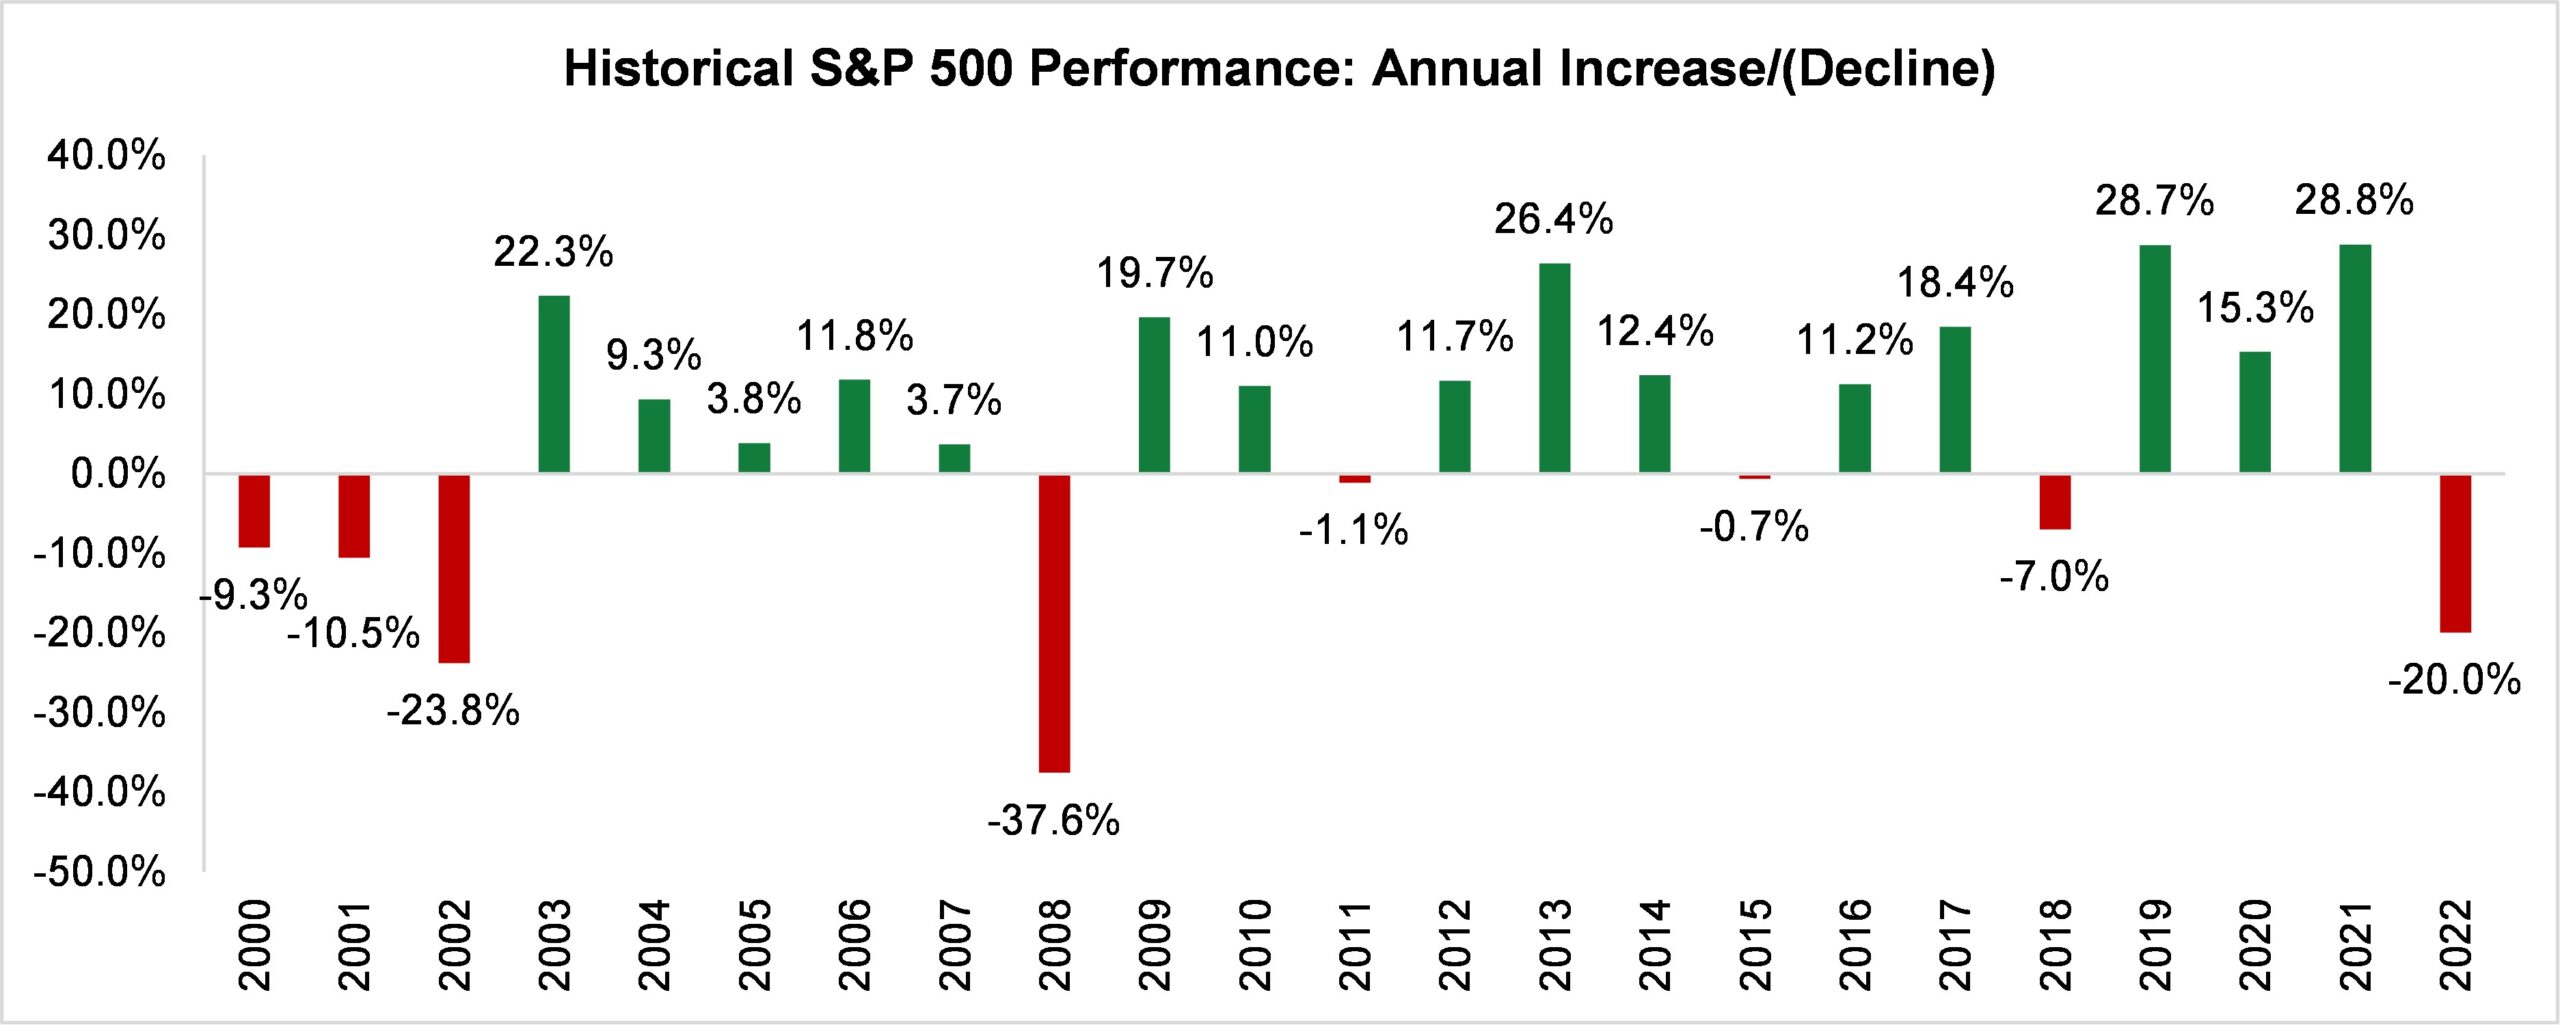 Historical S&P 500 Performance: Annual Increase/Decline